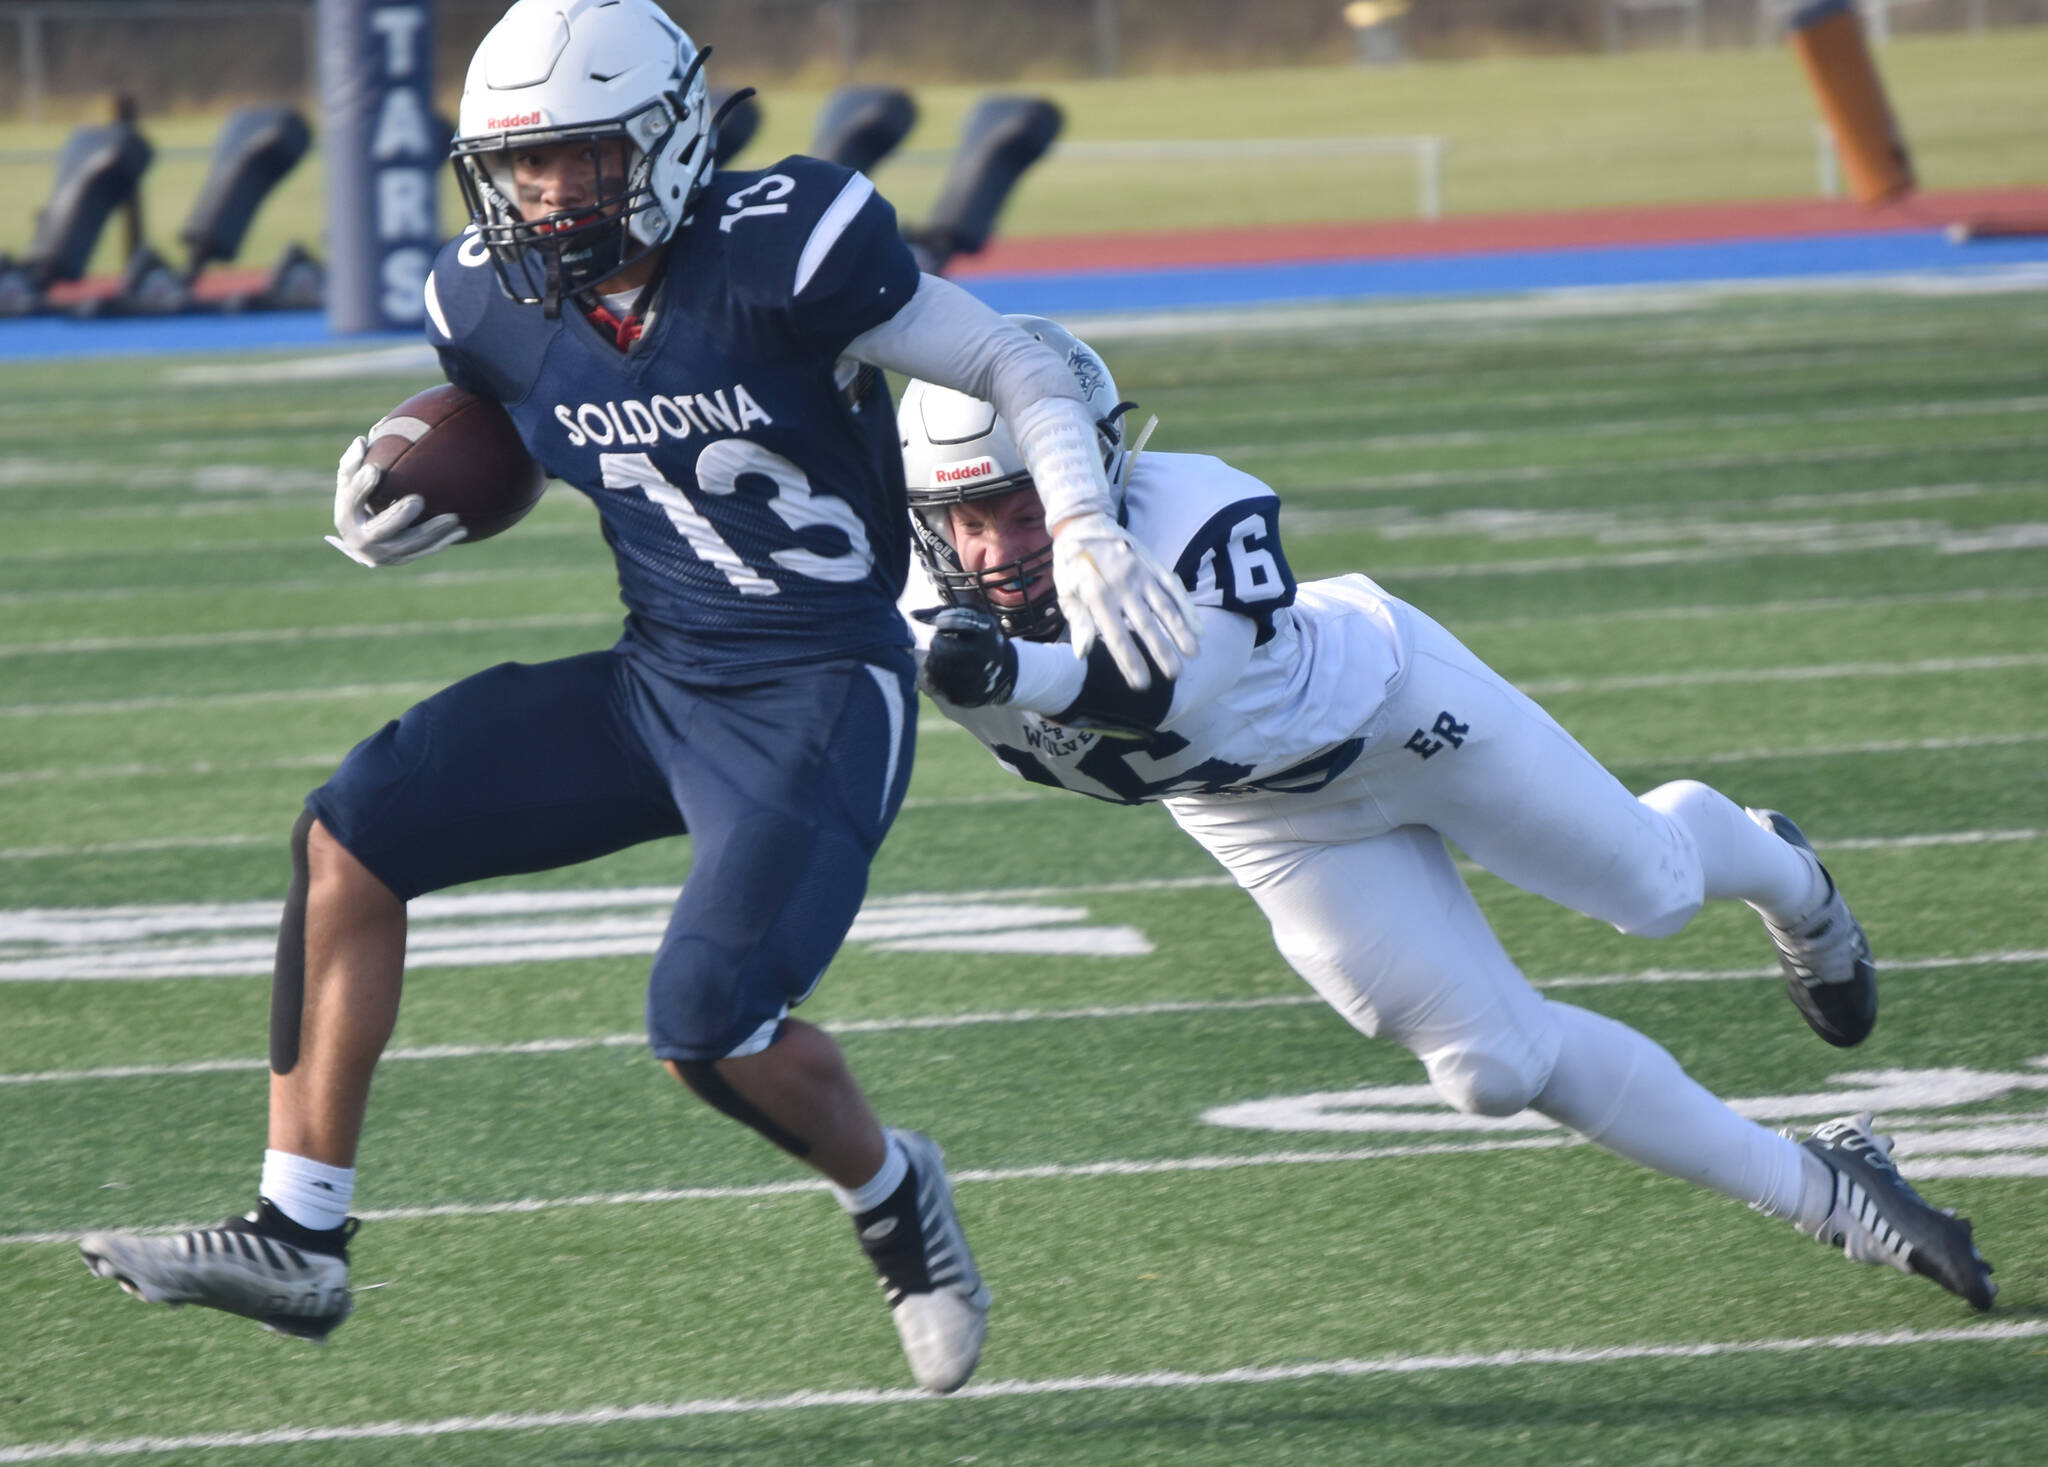 Soldotna’s Lokeni Wong breaks a tackle by Eagle River’s Matthew Watson on Saturday, Oct. 1, 2022, at Justin Maile Field at Soldotna High School in Soldotna, Alaska. (Photo by Jeff Helminiak/Peninsula Clarion)